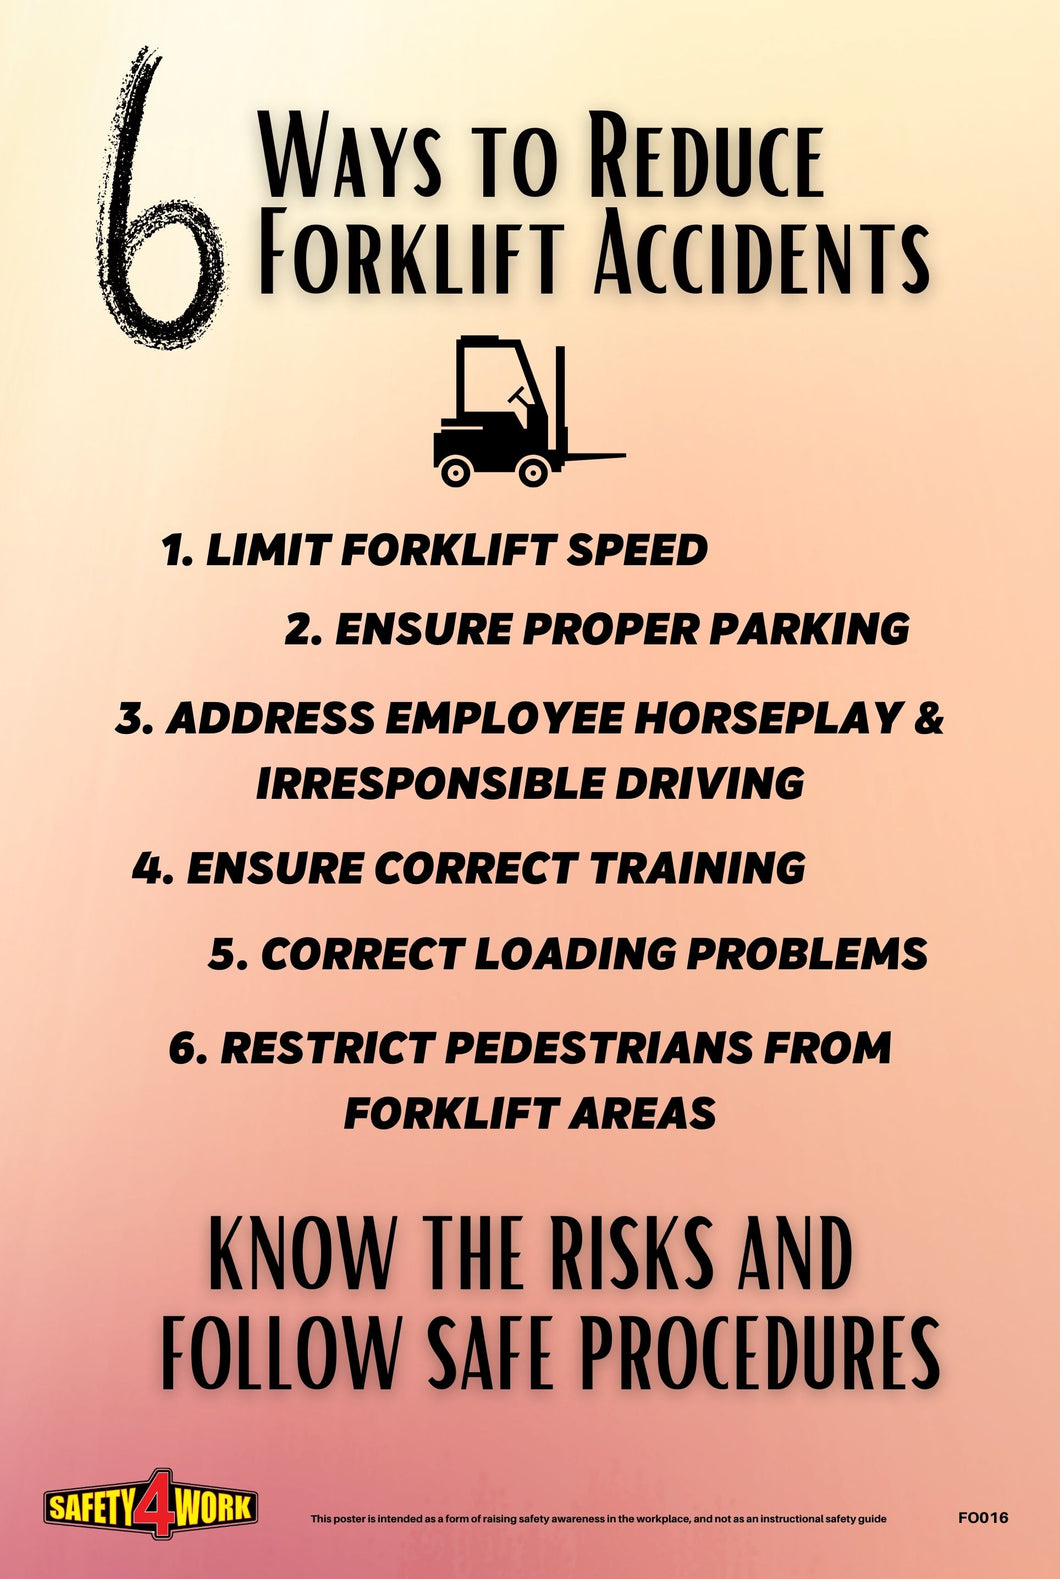 Safety, Forklifts, Workplace, Ways to reduce forklift accidents